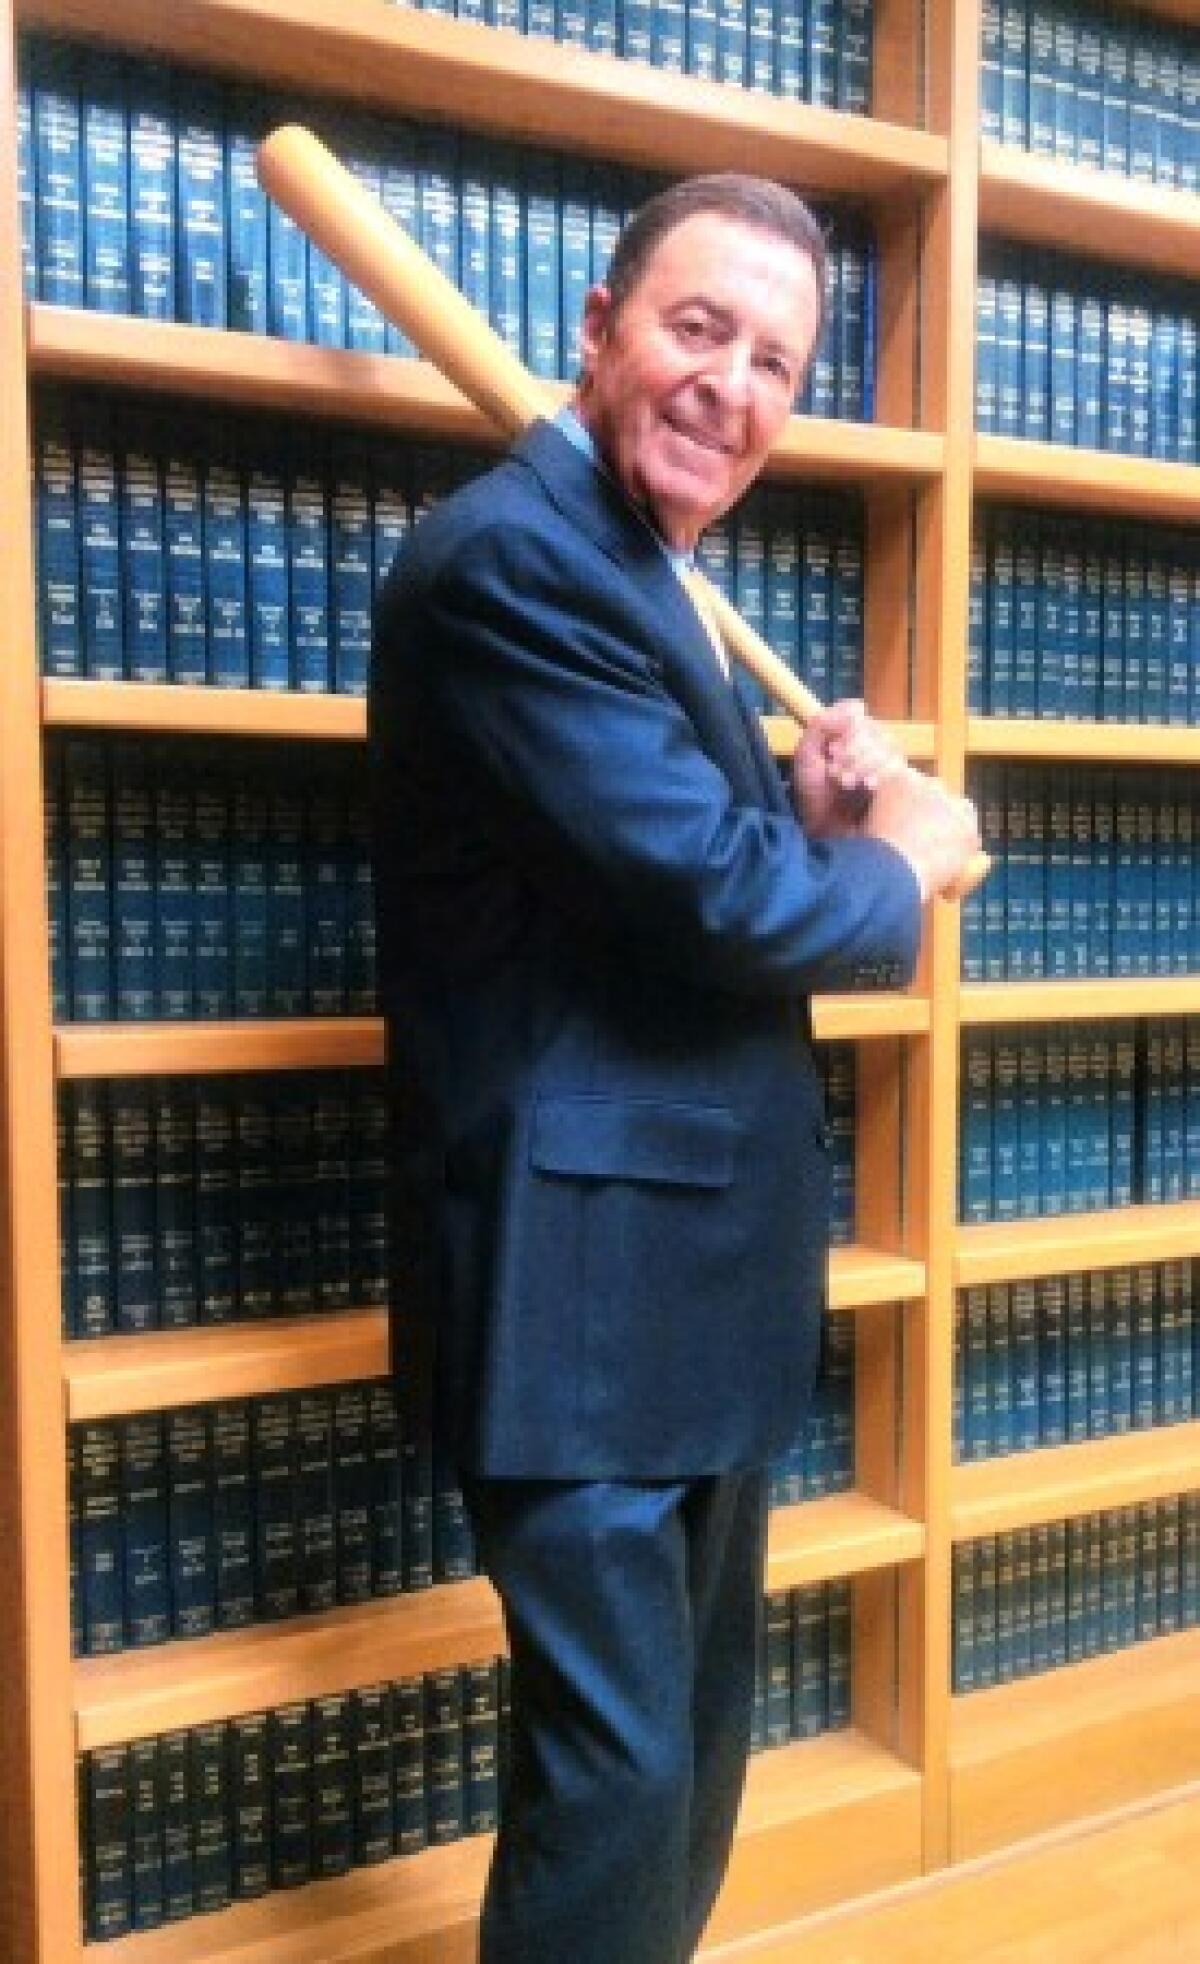 The late Jay Jaffe was a prominent criminal defense attorney in L.A. following his USC baseball career.